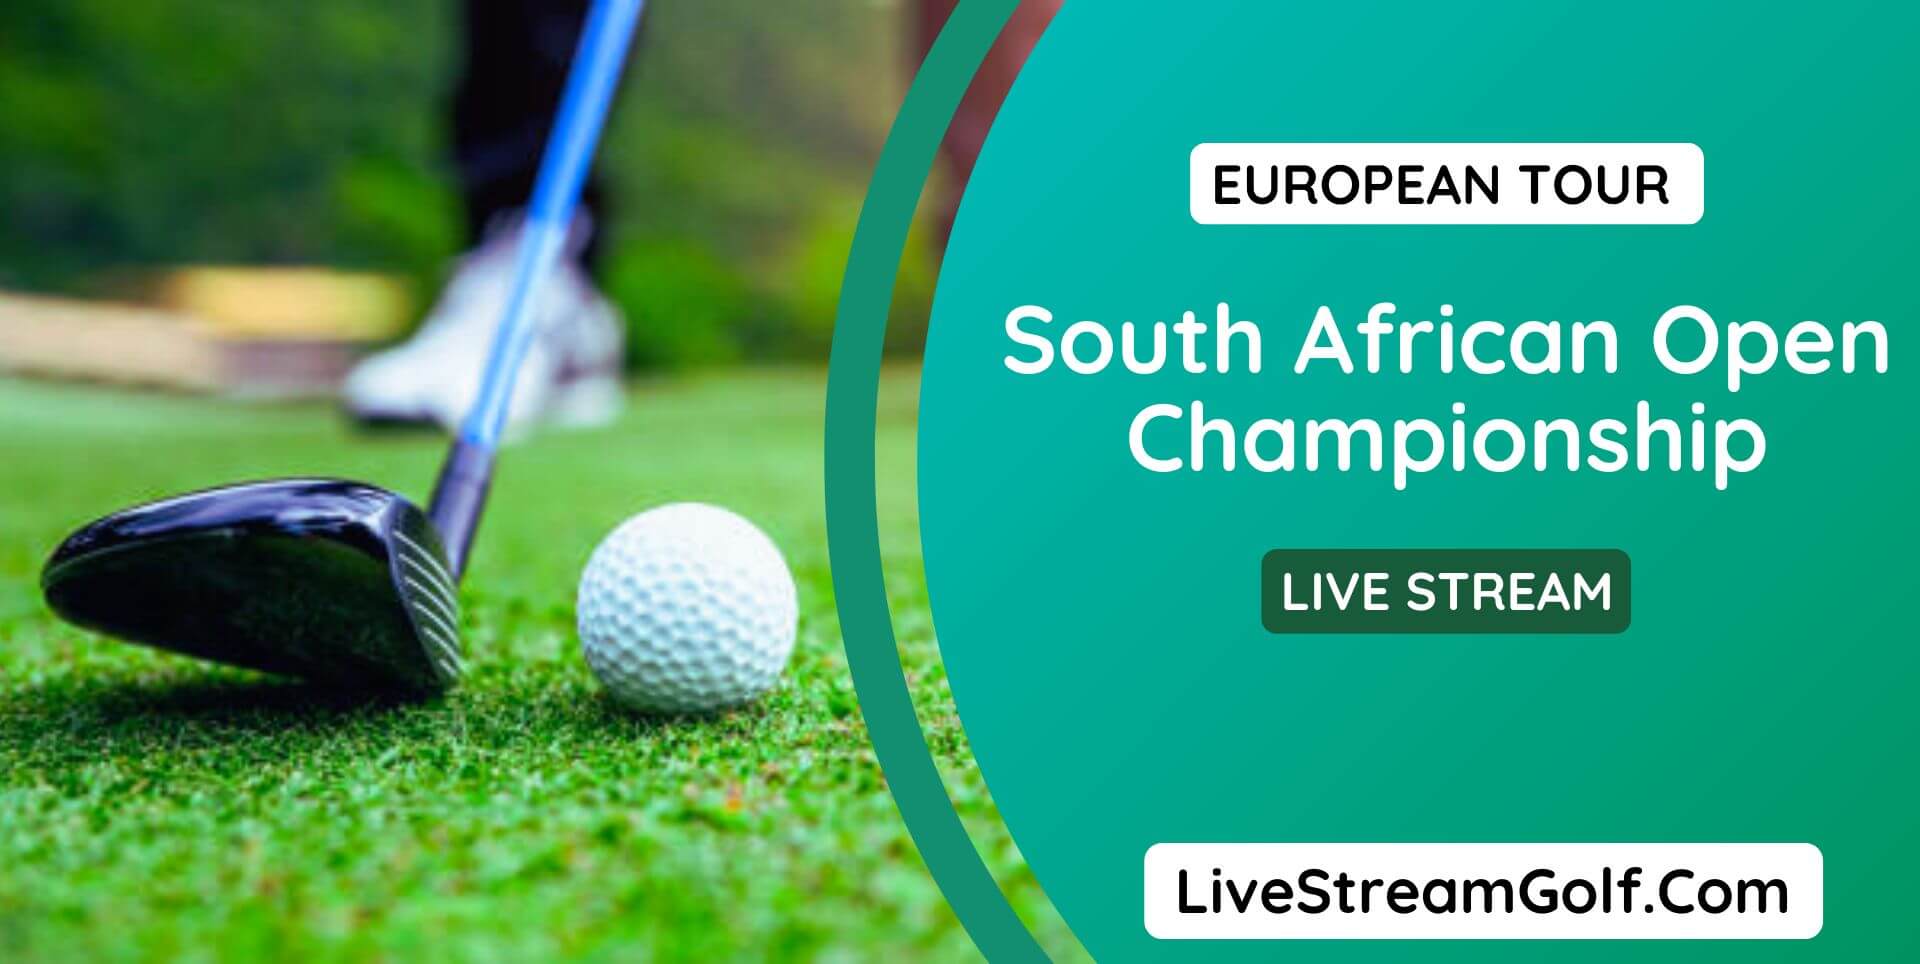 South African Open Day 1 Live Stream: European Tour 2022